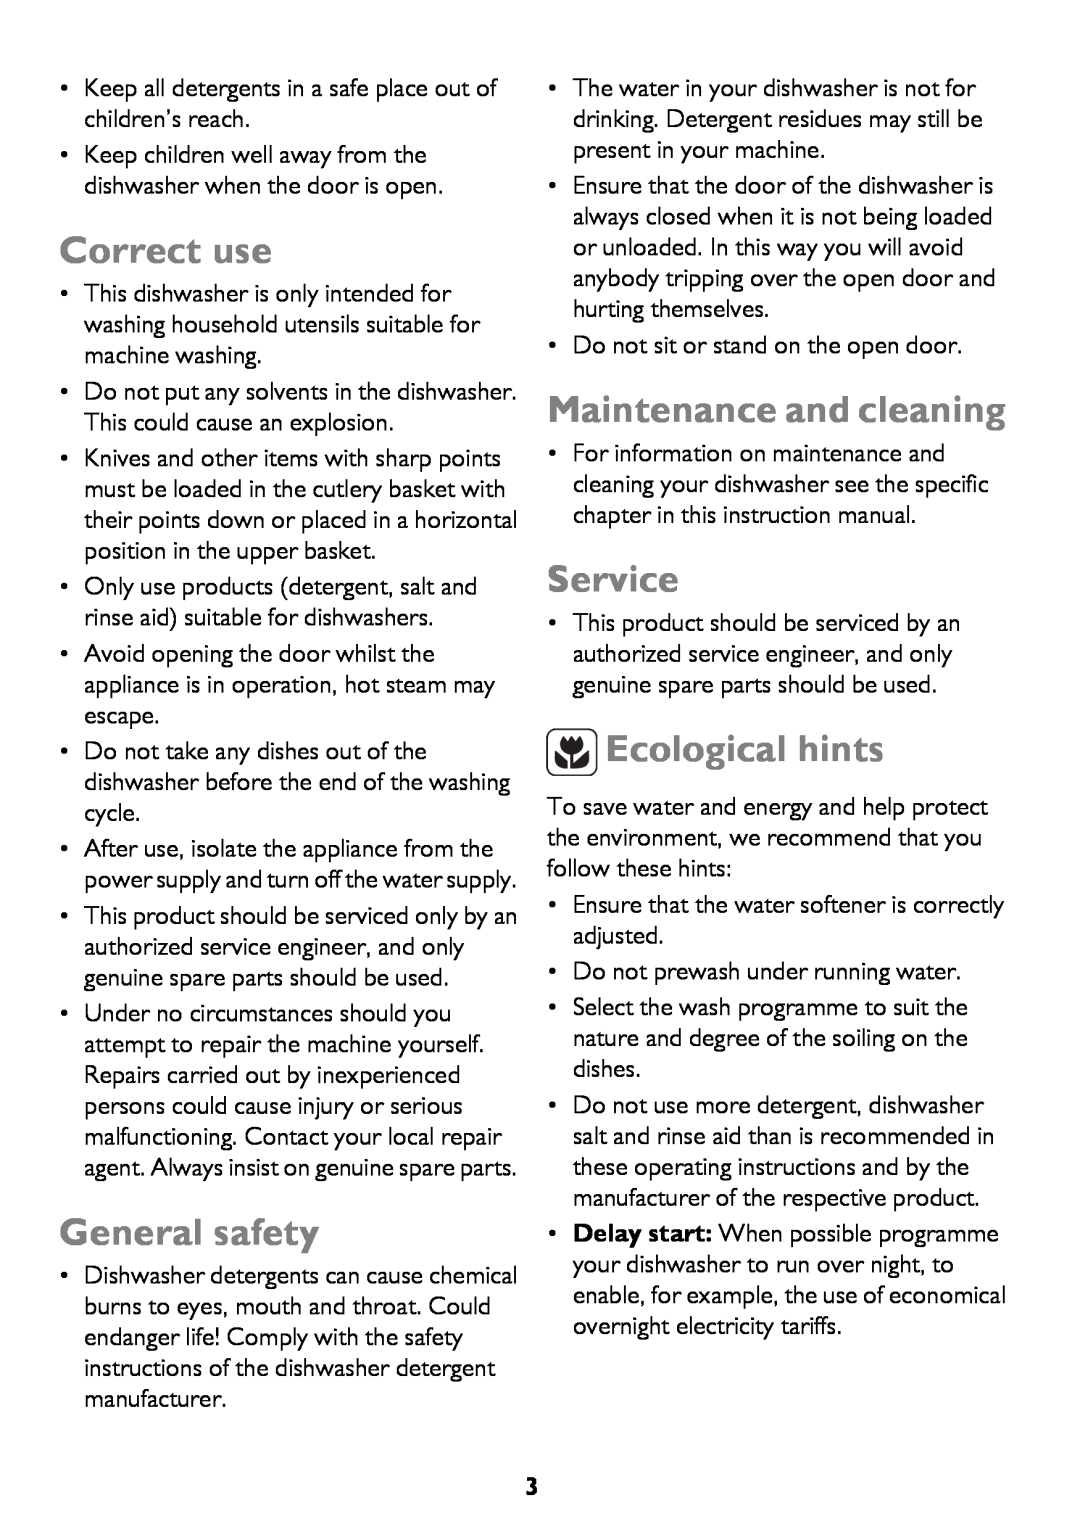 John Lewis JLDWS1208 instruction manual Correct use, General safety, Maintenance and cleaning, Service, Ecological hints 